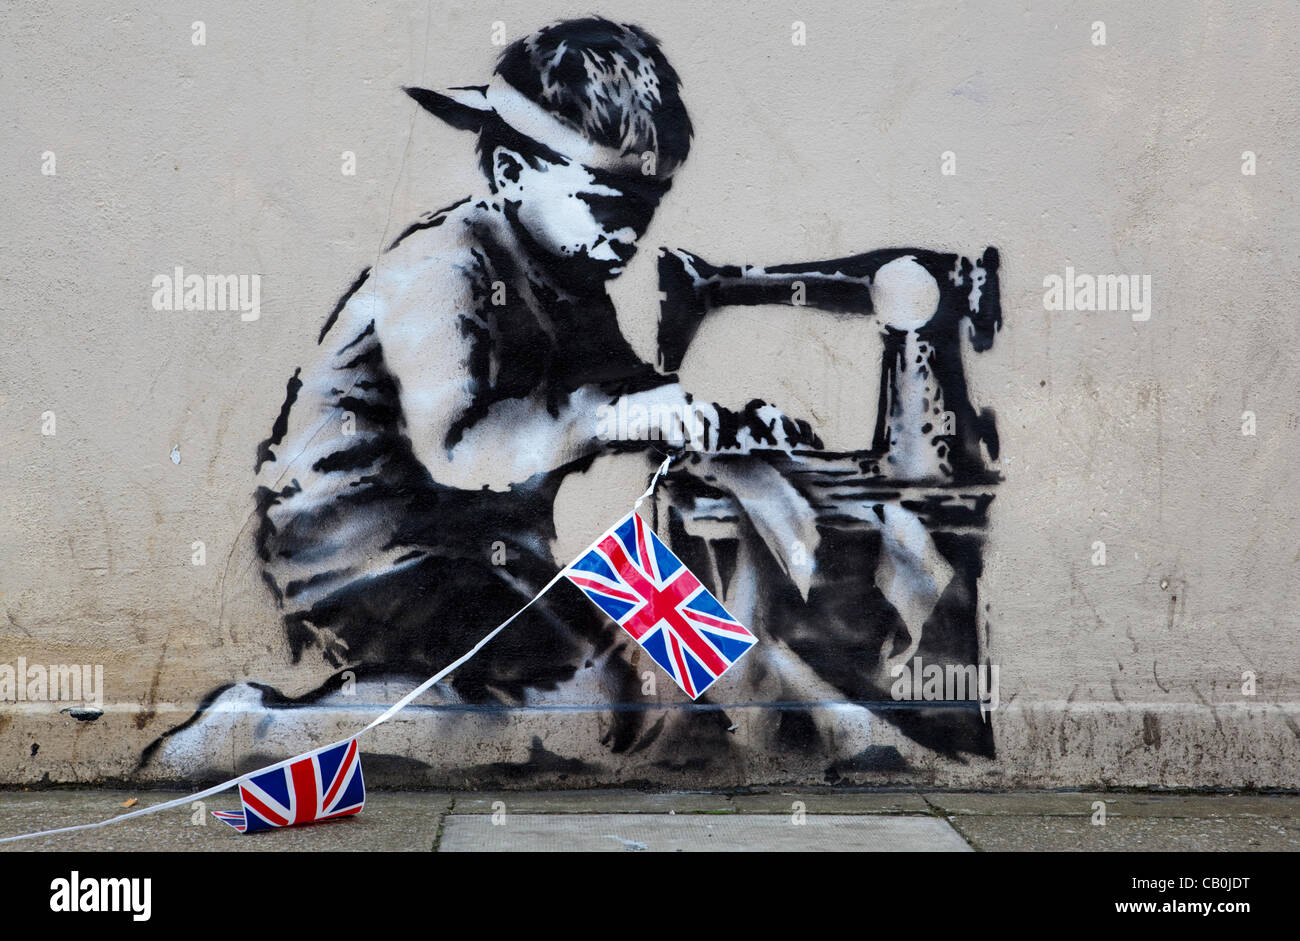 A new work from Graffiti Artist Banksy has appeared overnight in London. The piece depicts a Asian child stitching together Union Jack Bunting.  The work on the wall of retailer 'Poundland' is said to be Banksy's commentary on child labour and the upcoming Queen's Diamond Jubilee celebrations. Stock Photo